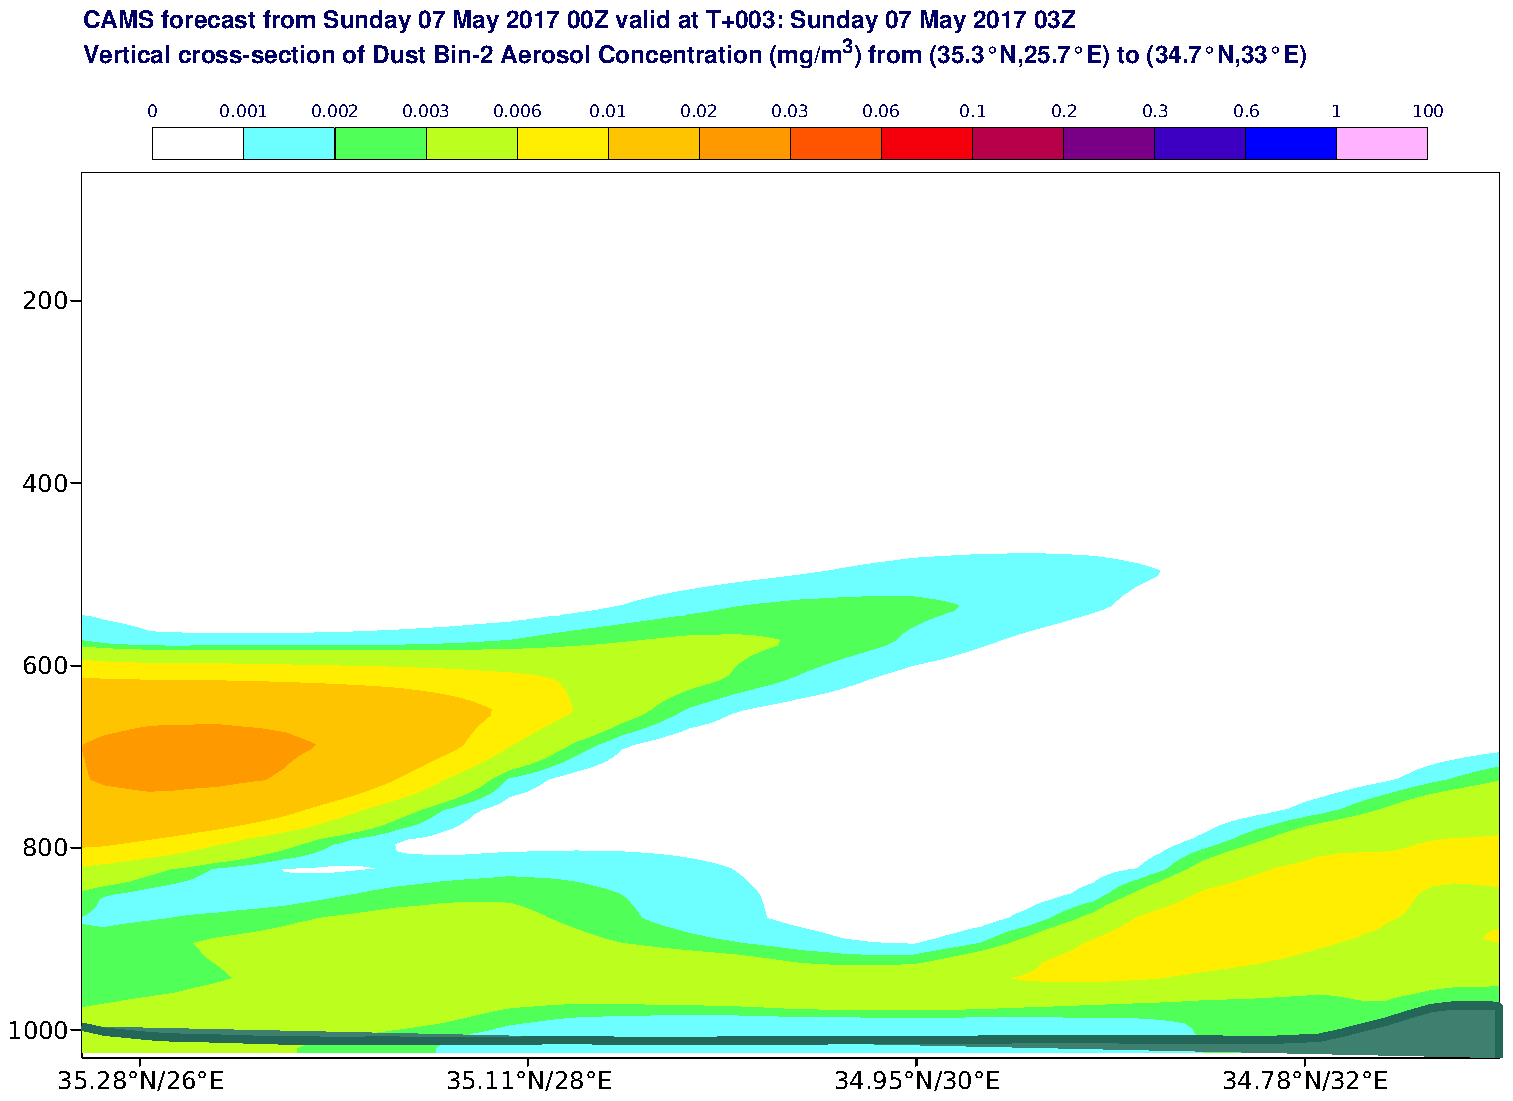 Vertical cross-section of Dust Bin-2 Aerosol Concentration (mg/m3) valid at T3 - 2017-05-07 03:00